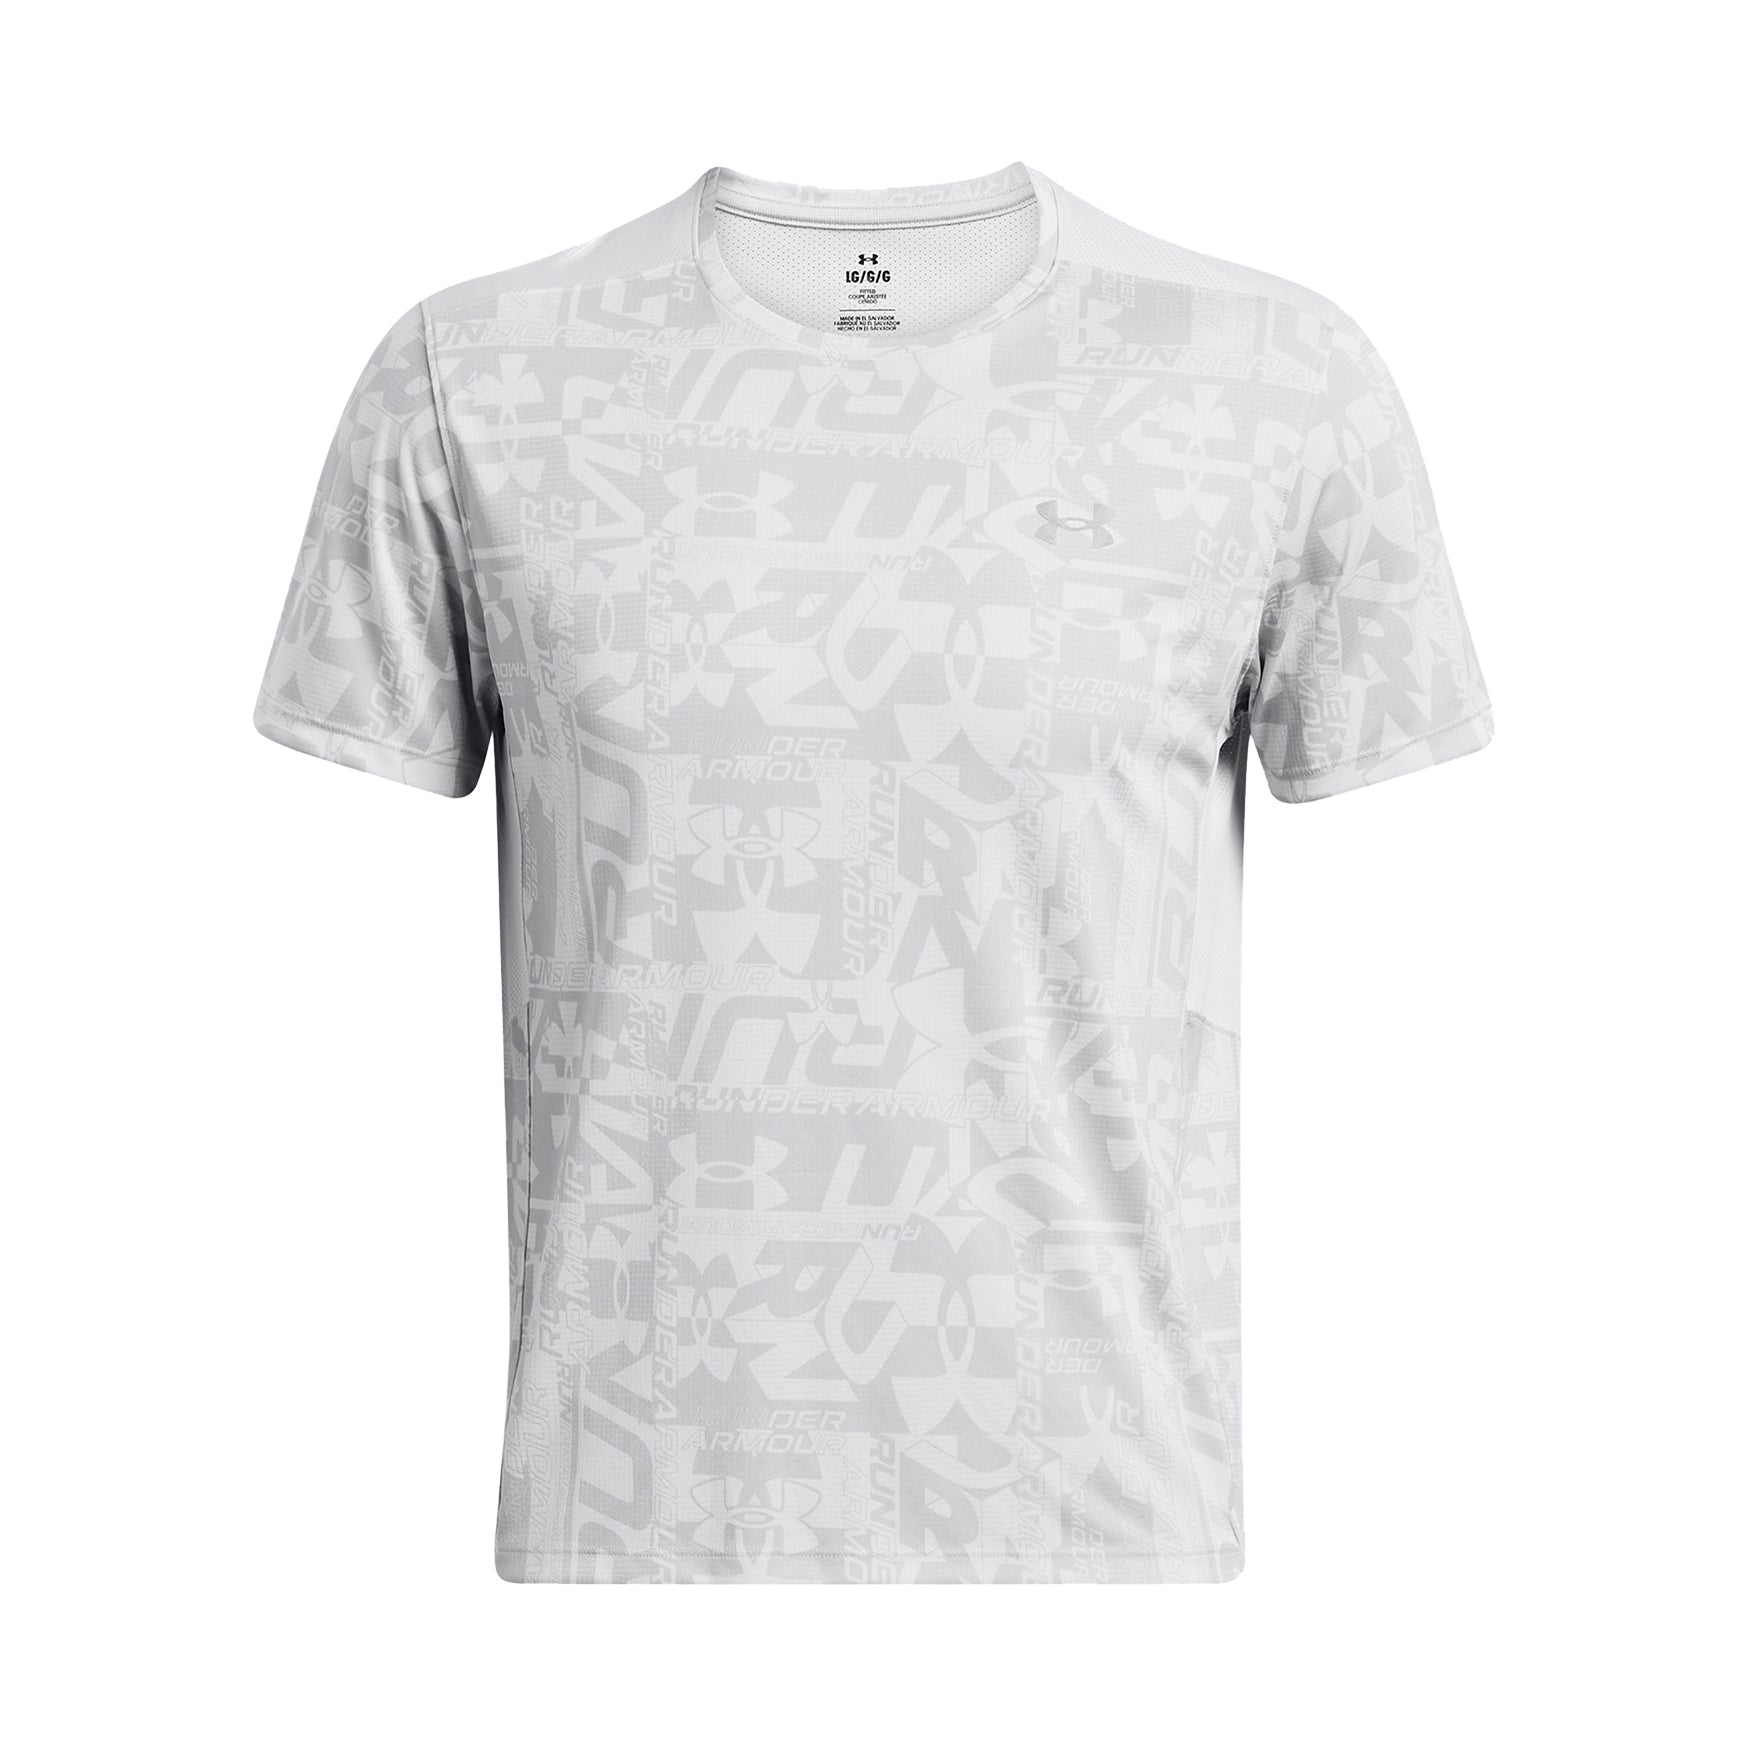 Under Armour Launch Printed Tee (Halo Grey)